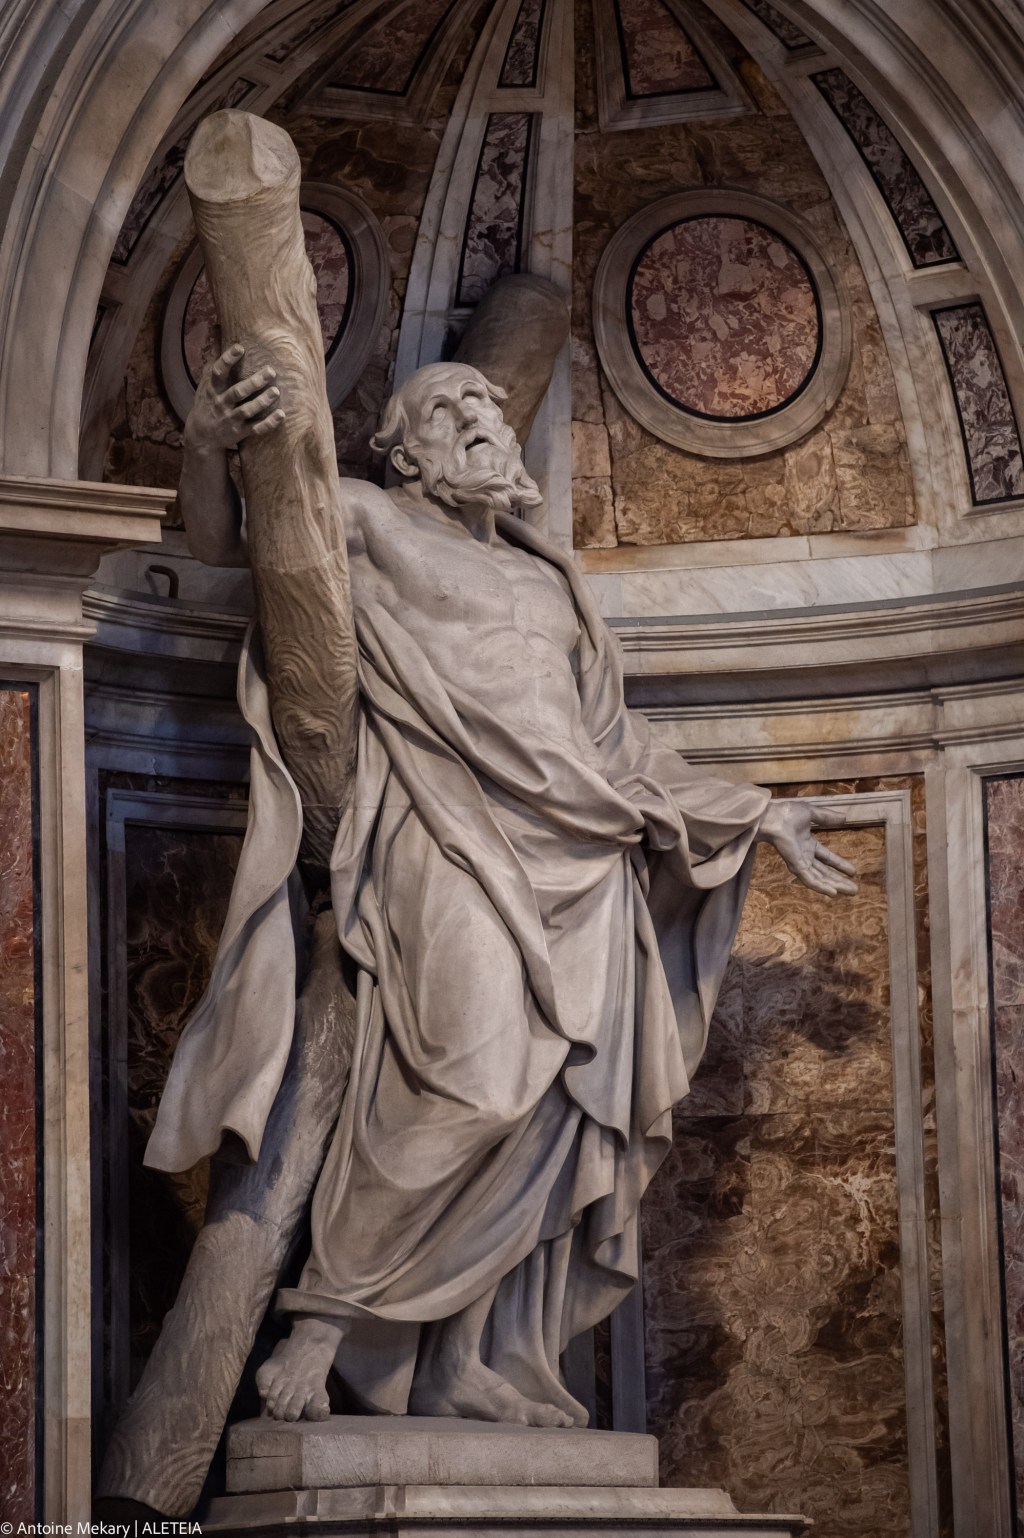 St-Andrew-the-brother-of-St-Peter-leans-into-the-X-shaped-cross-on-which-Andrew-was-martyred